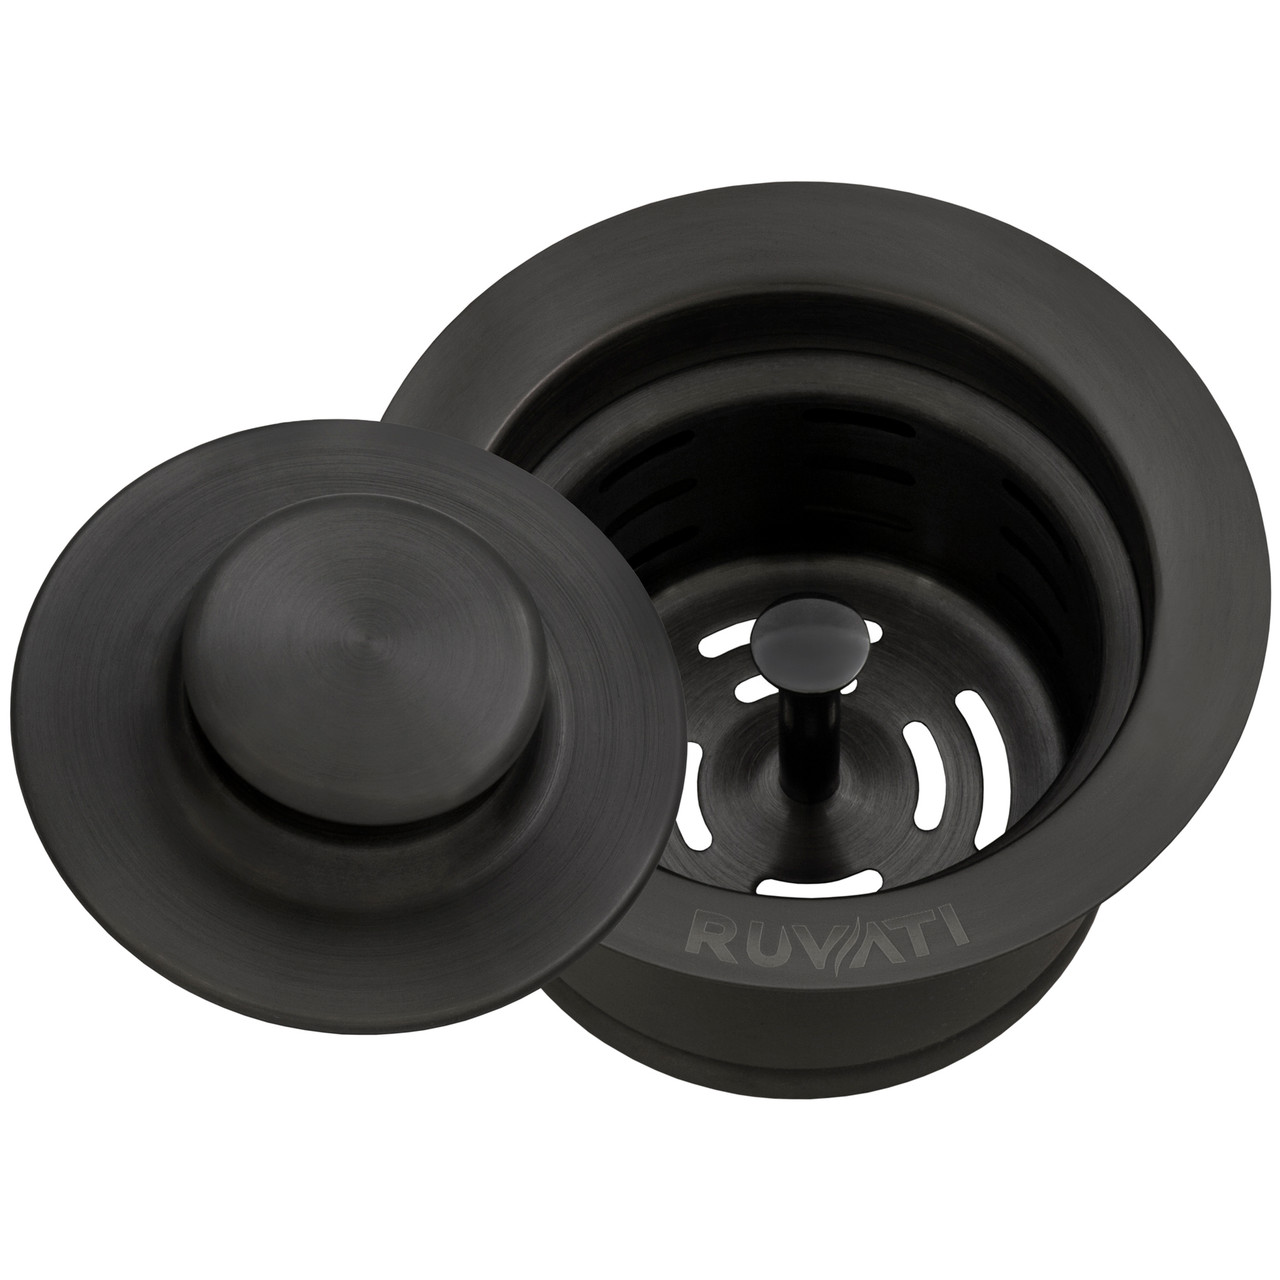 Extended Garbage Disposal Flange with Deep Basket Strainer for